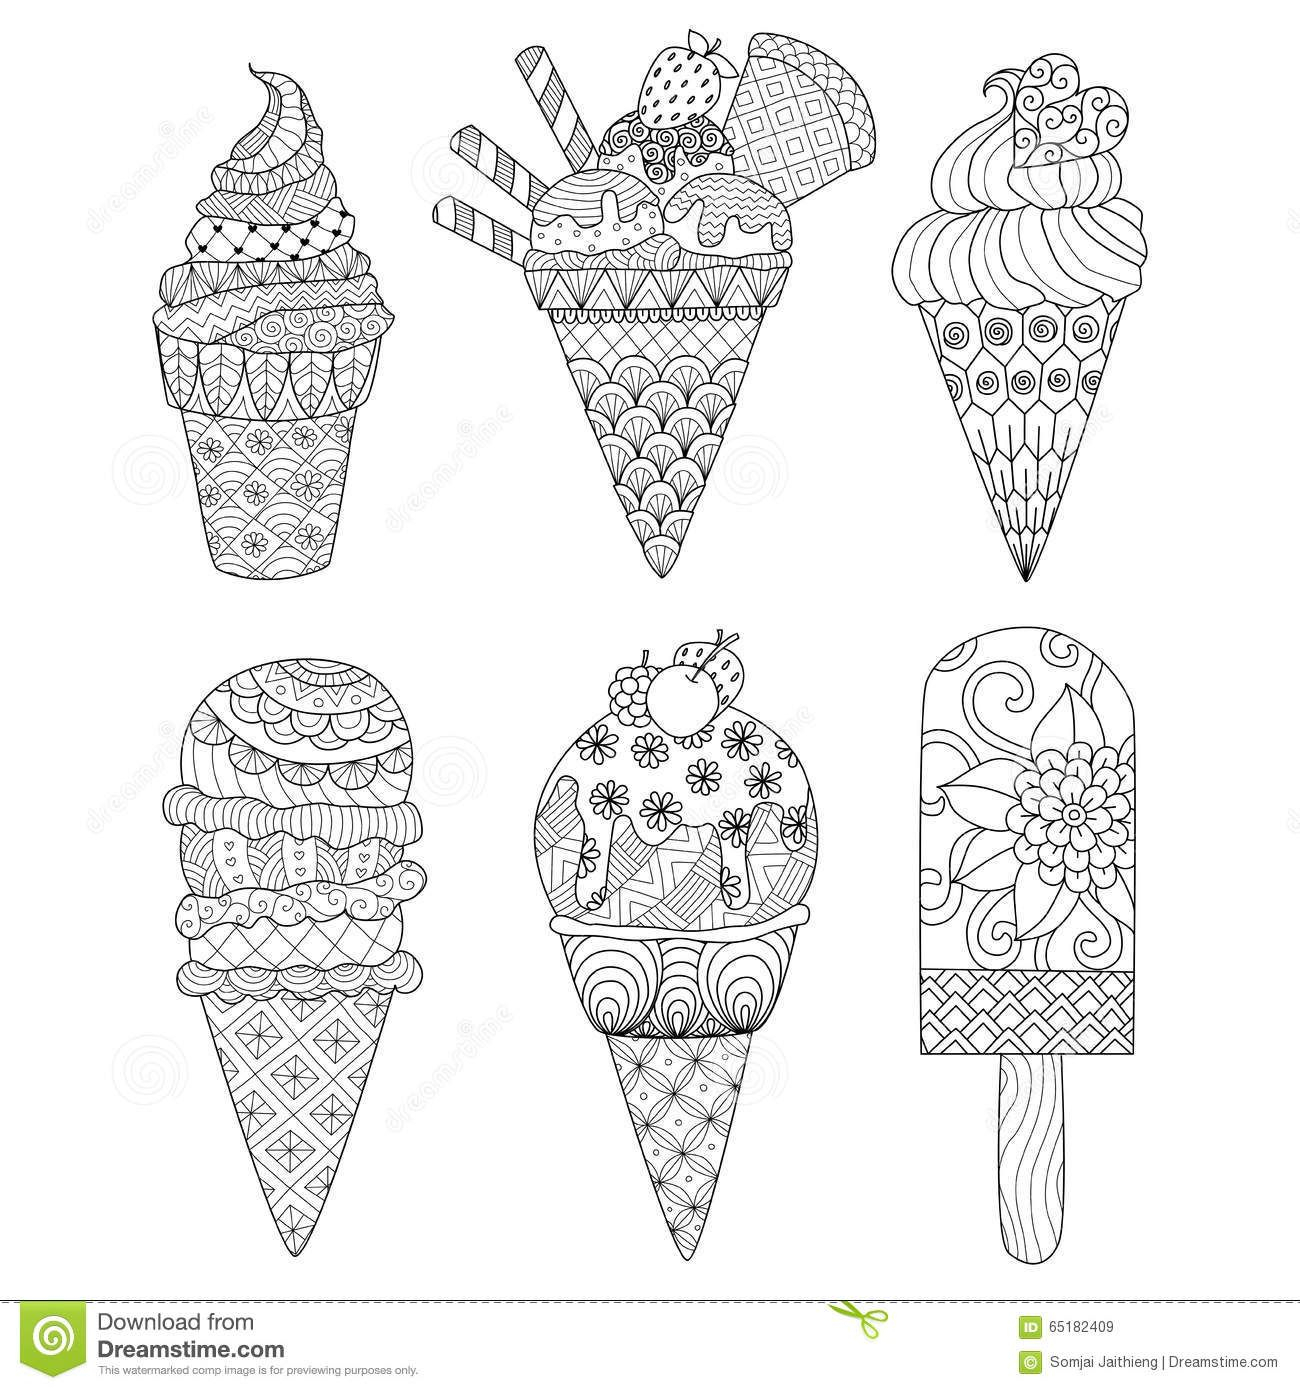 Coloring Page | Ice Cream Coloring Pages, Coloring Books concernant Coloriage Glace,